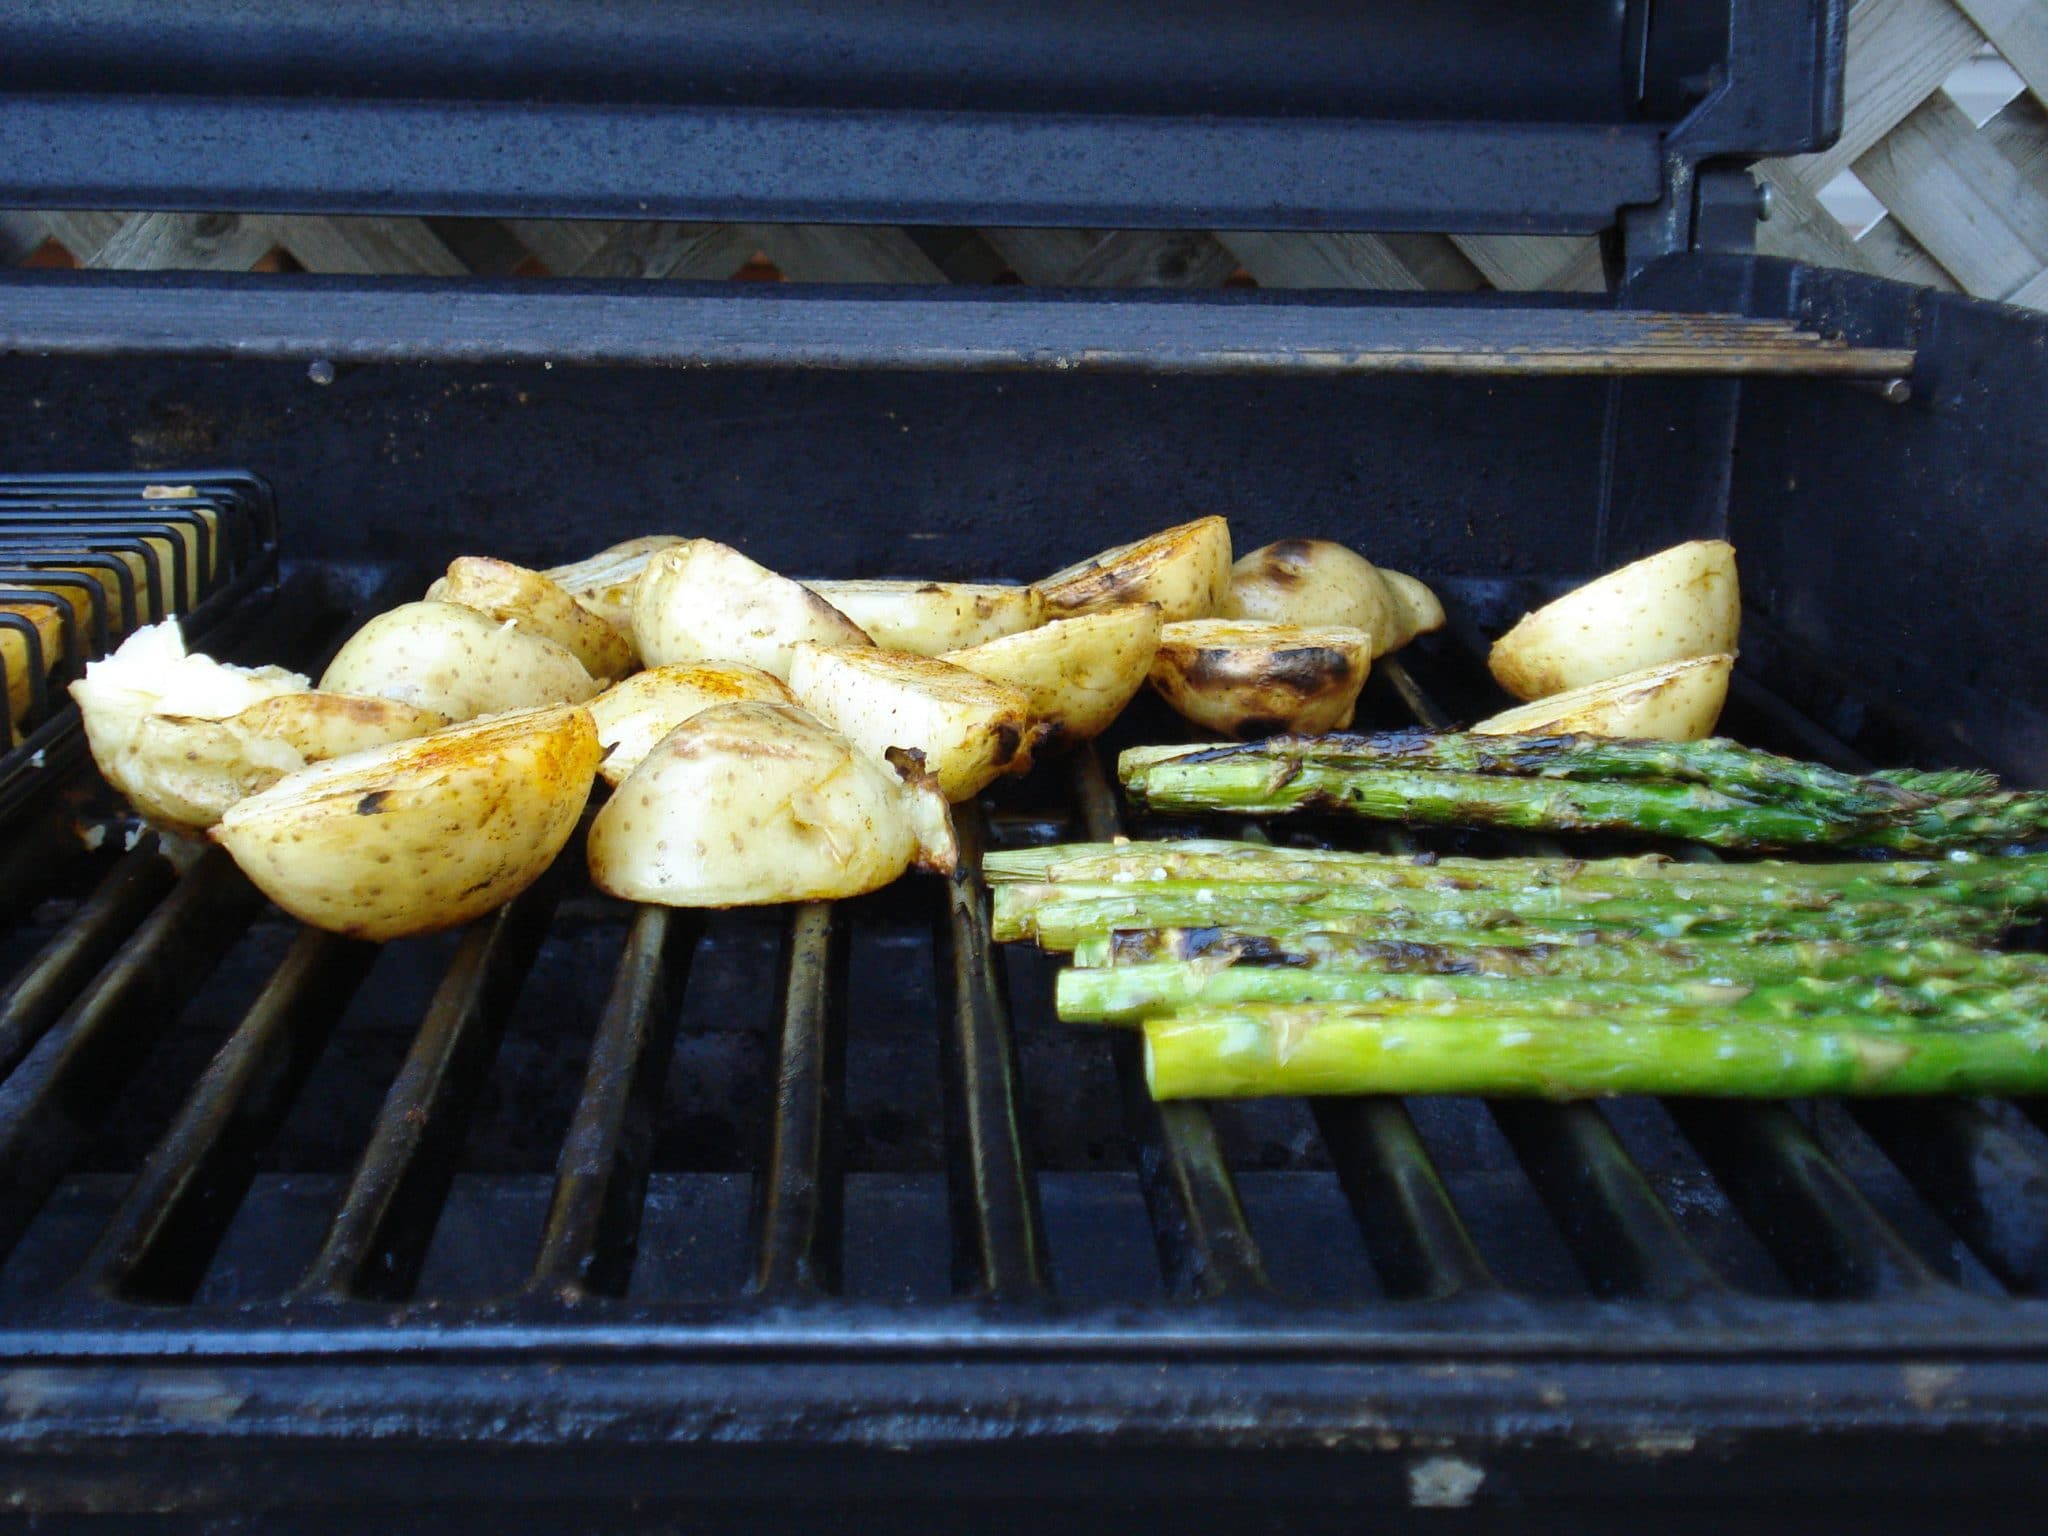 Sliced potato and asparagus on grill